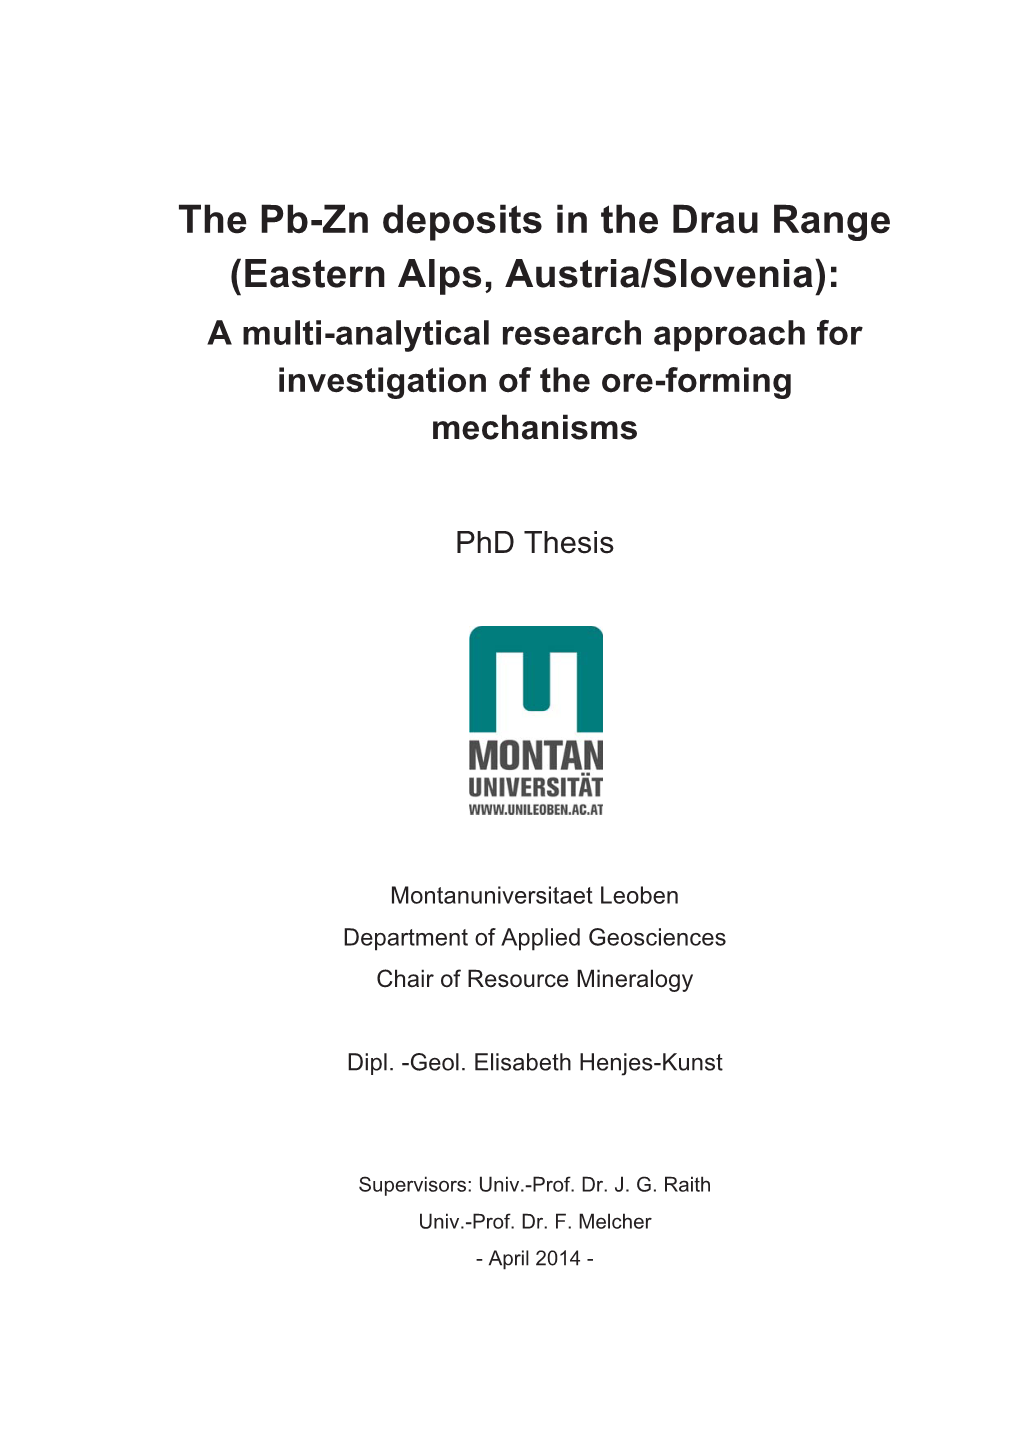 The Pb-Zn Deposits in the Drau Range (Eastern Alps, Austria/Slovenia): a Multi-Analytical Research Approach for Investigation of the Ore-Forming Mechanisms